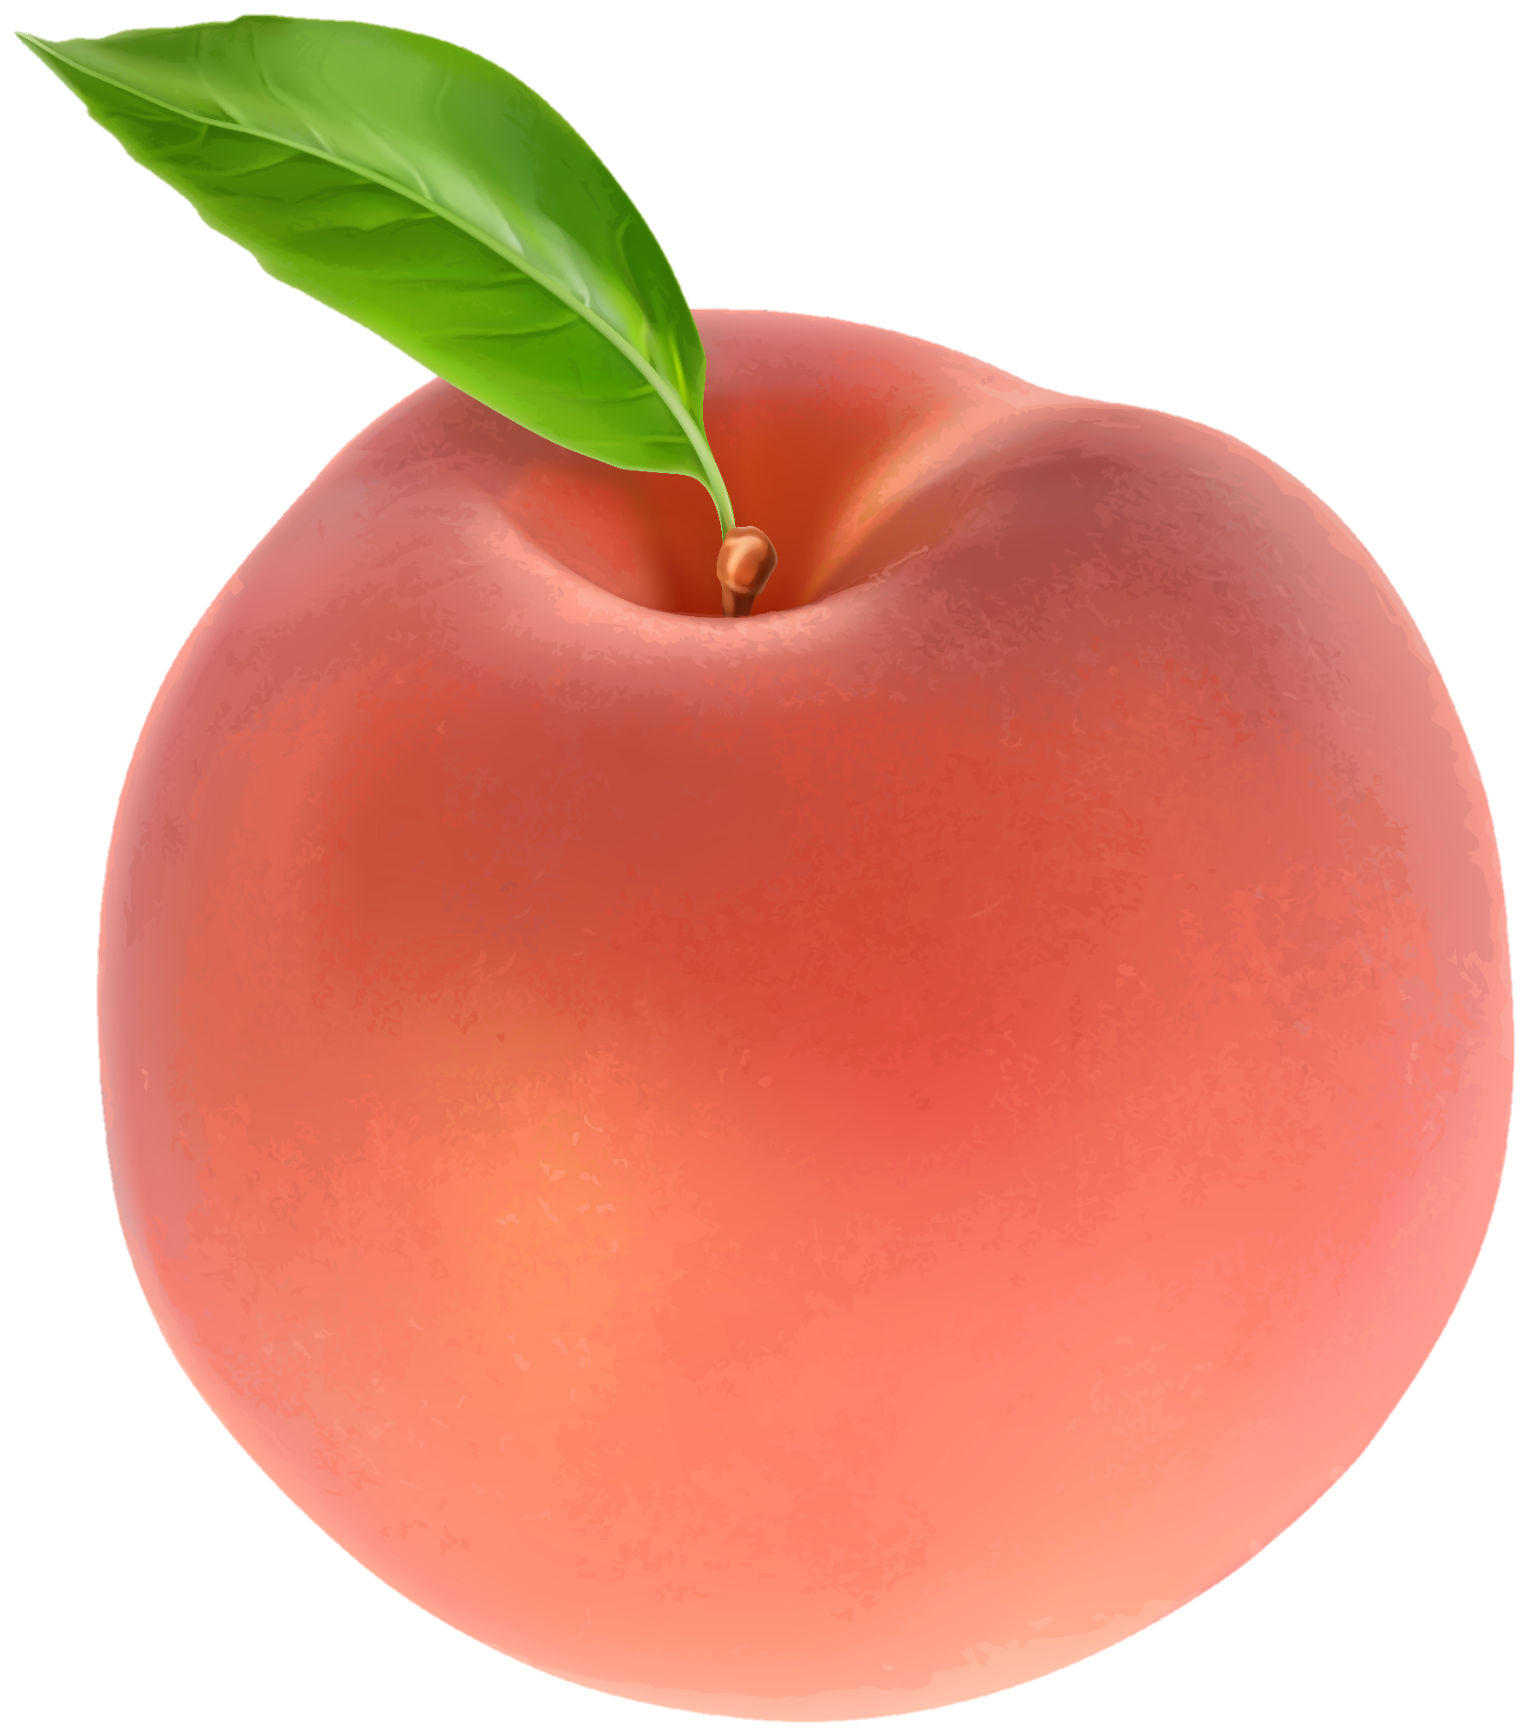 peach-png-image-from-pngfre-37